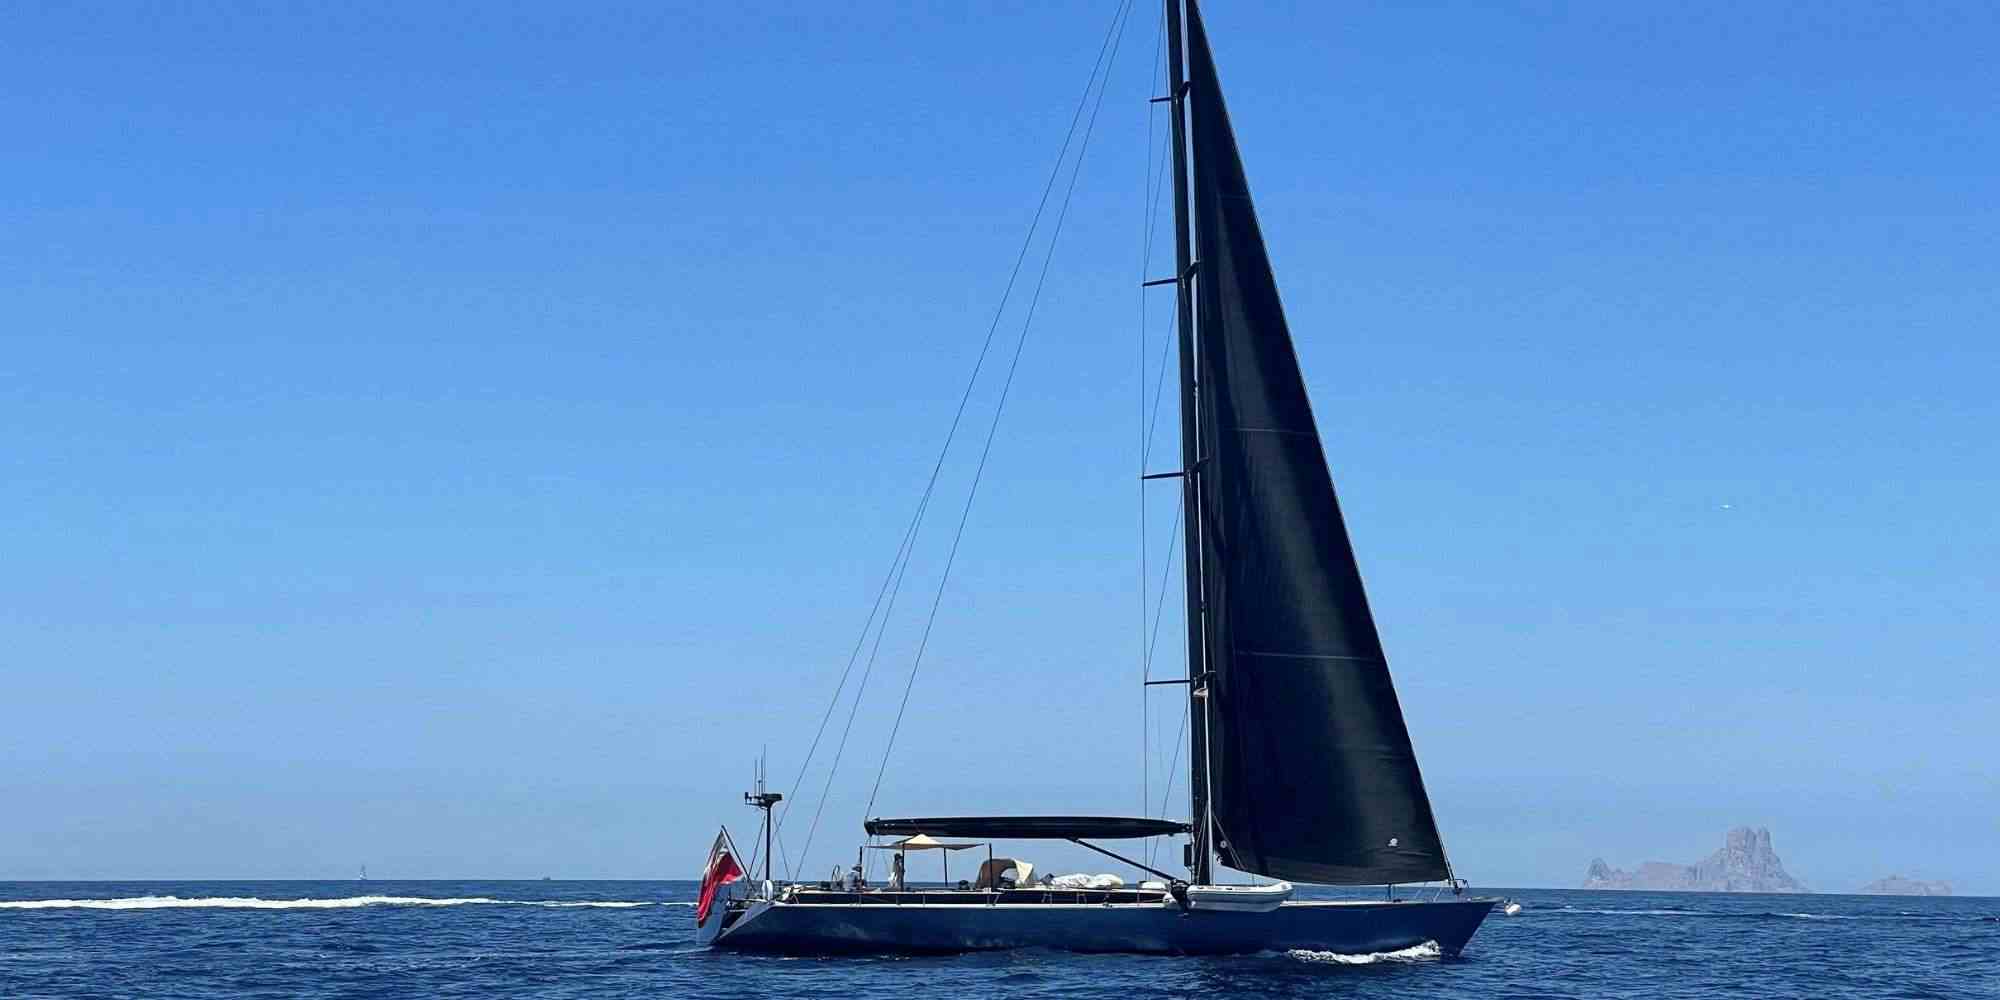 WALLY ONE - Sailboat Charter The Canaries & Boat hire in W. Med -Naples/Sicily, W. Med -Riviera/Cors/Sard., W. Med - Spain/Balearics 1